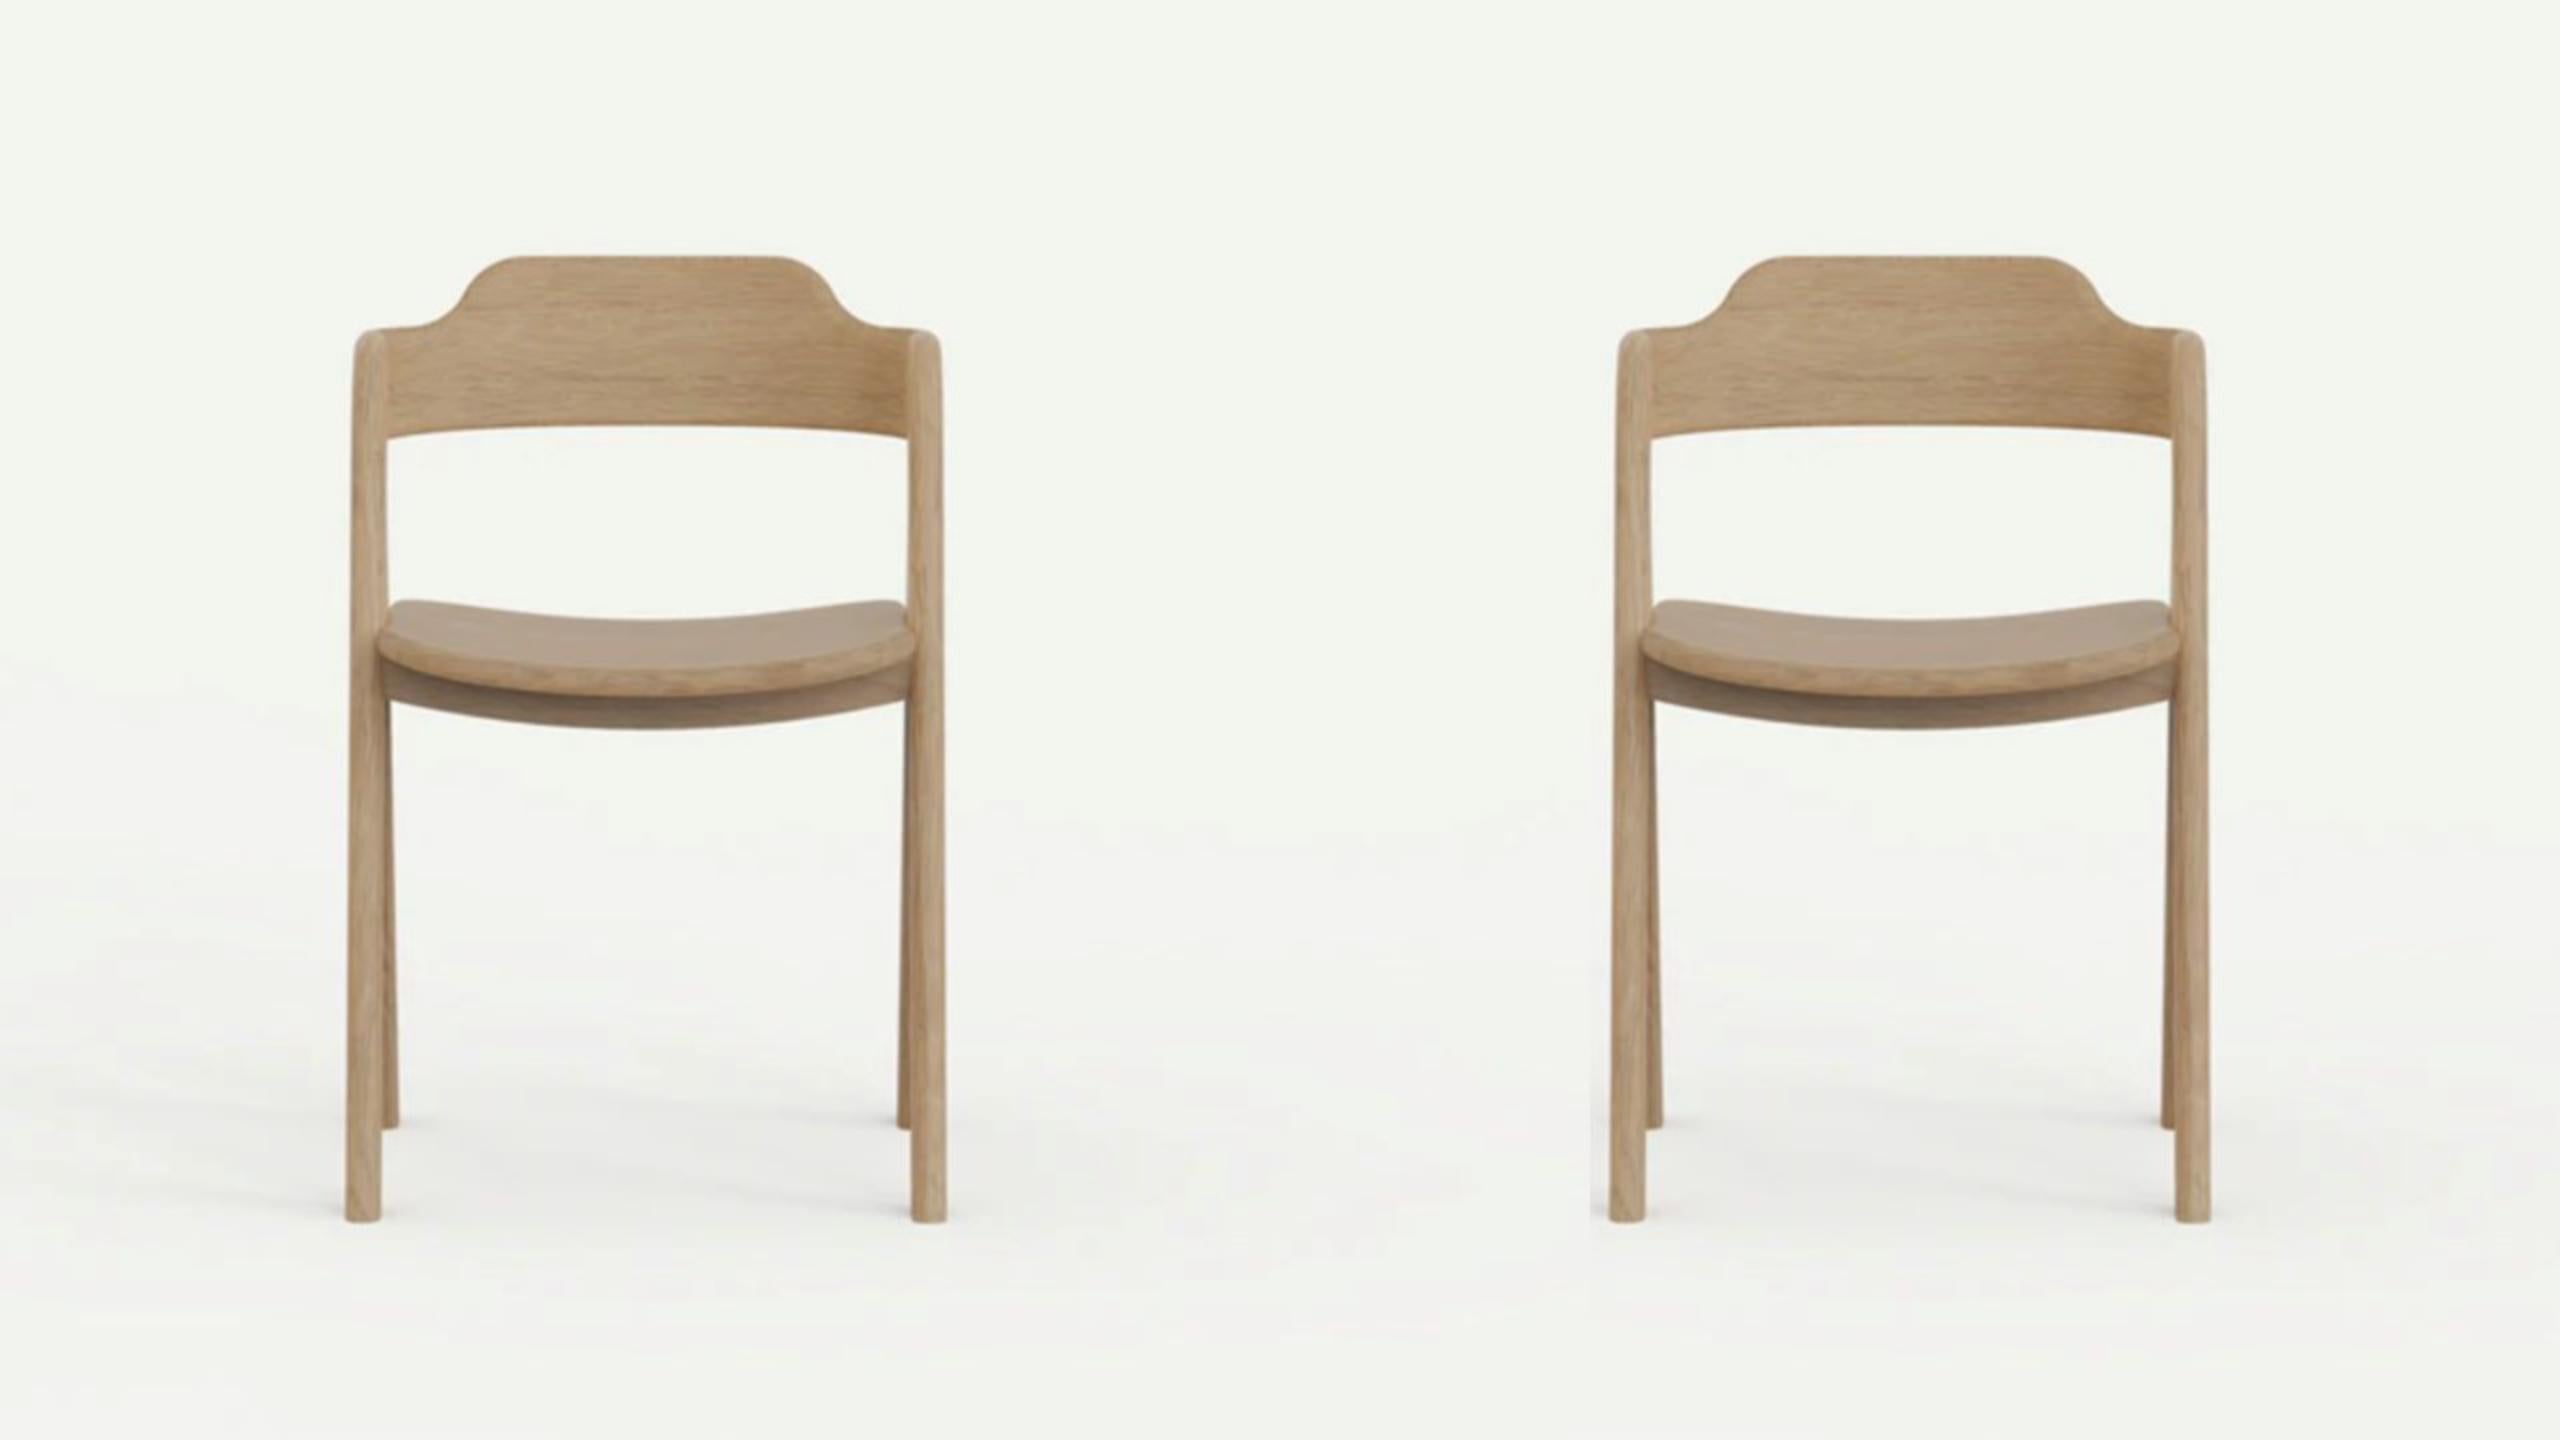 Set of 2 Balance chairs by Sebastián Angeles
Material: Walnut
Dimensions: W 40 x D 40 x 100 cm
Also available: Other colors available

The love of processes, the properties of materials, details and concepts make Dorica Taller a study not only